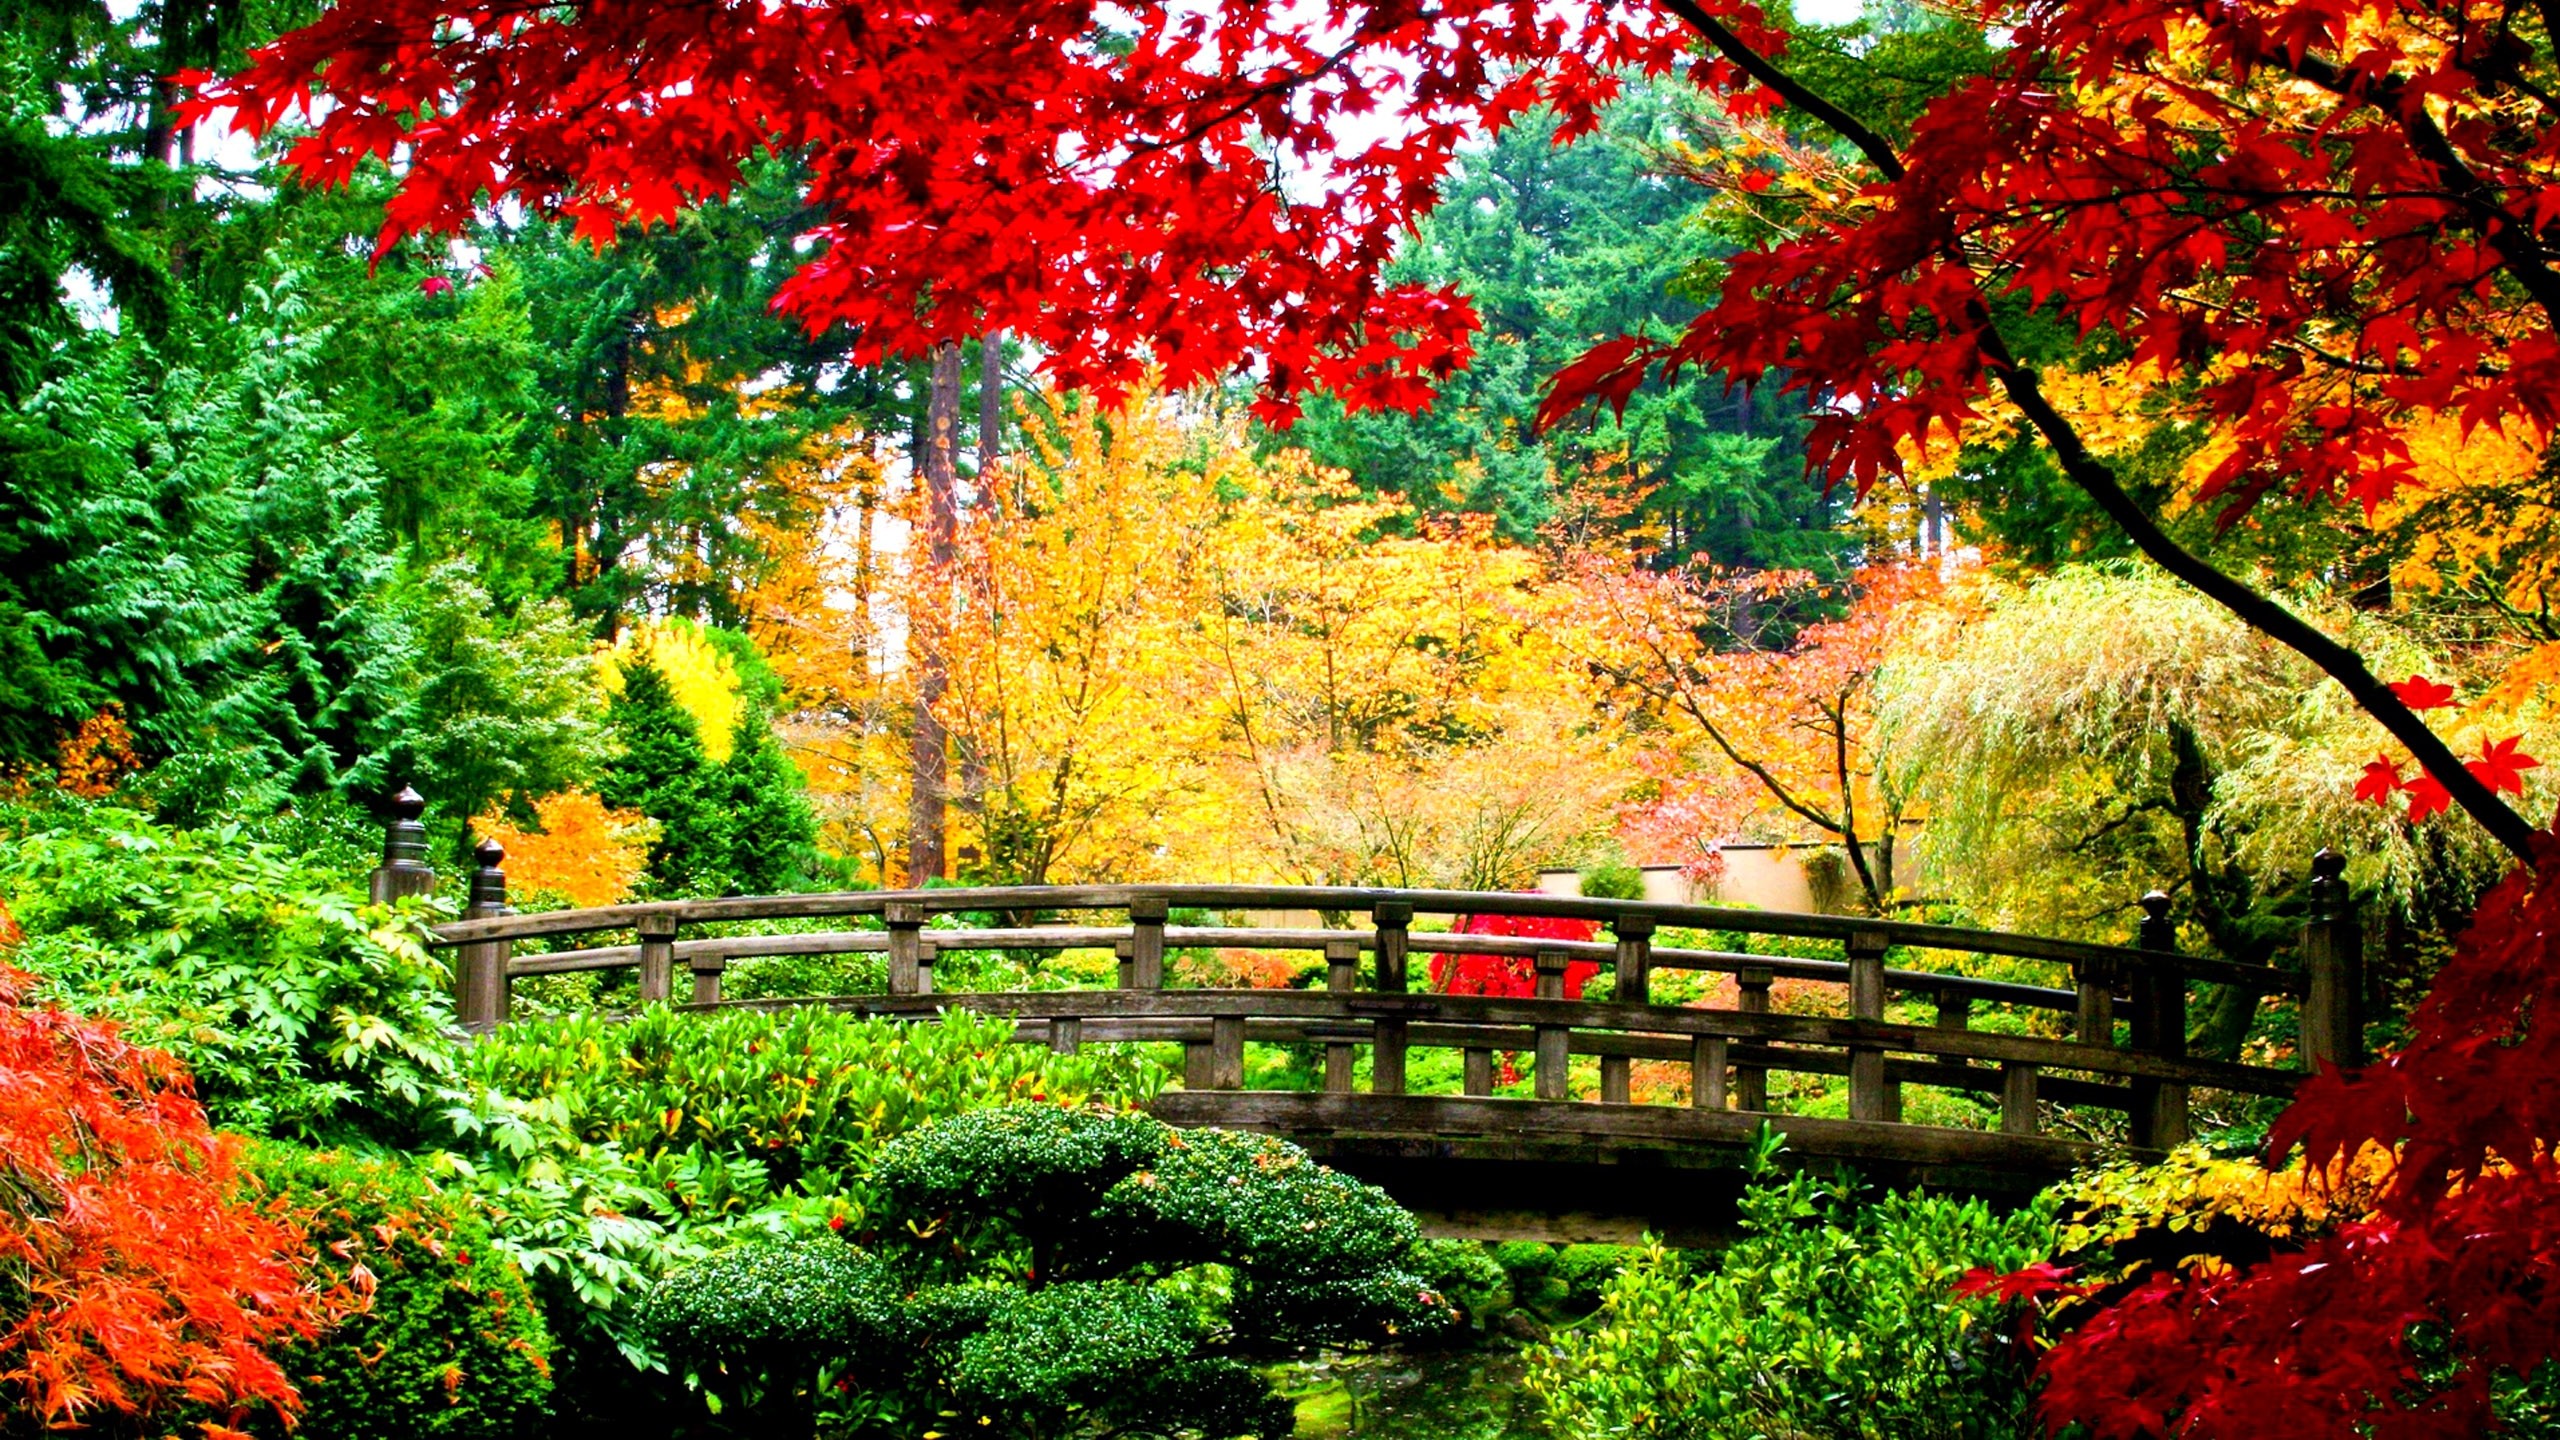 2560x1440 Usa garden autumn portland japanese shrubs trees nature wallpaper - Find  This Pin And More On